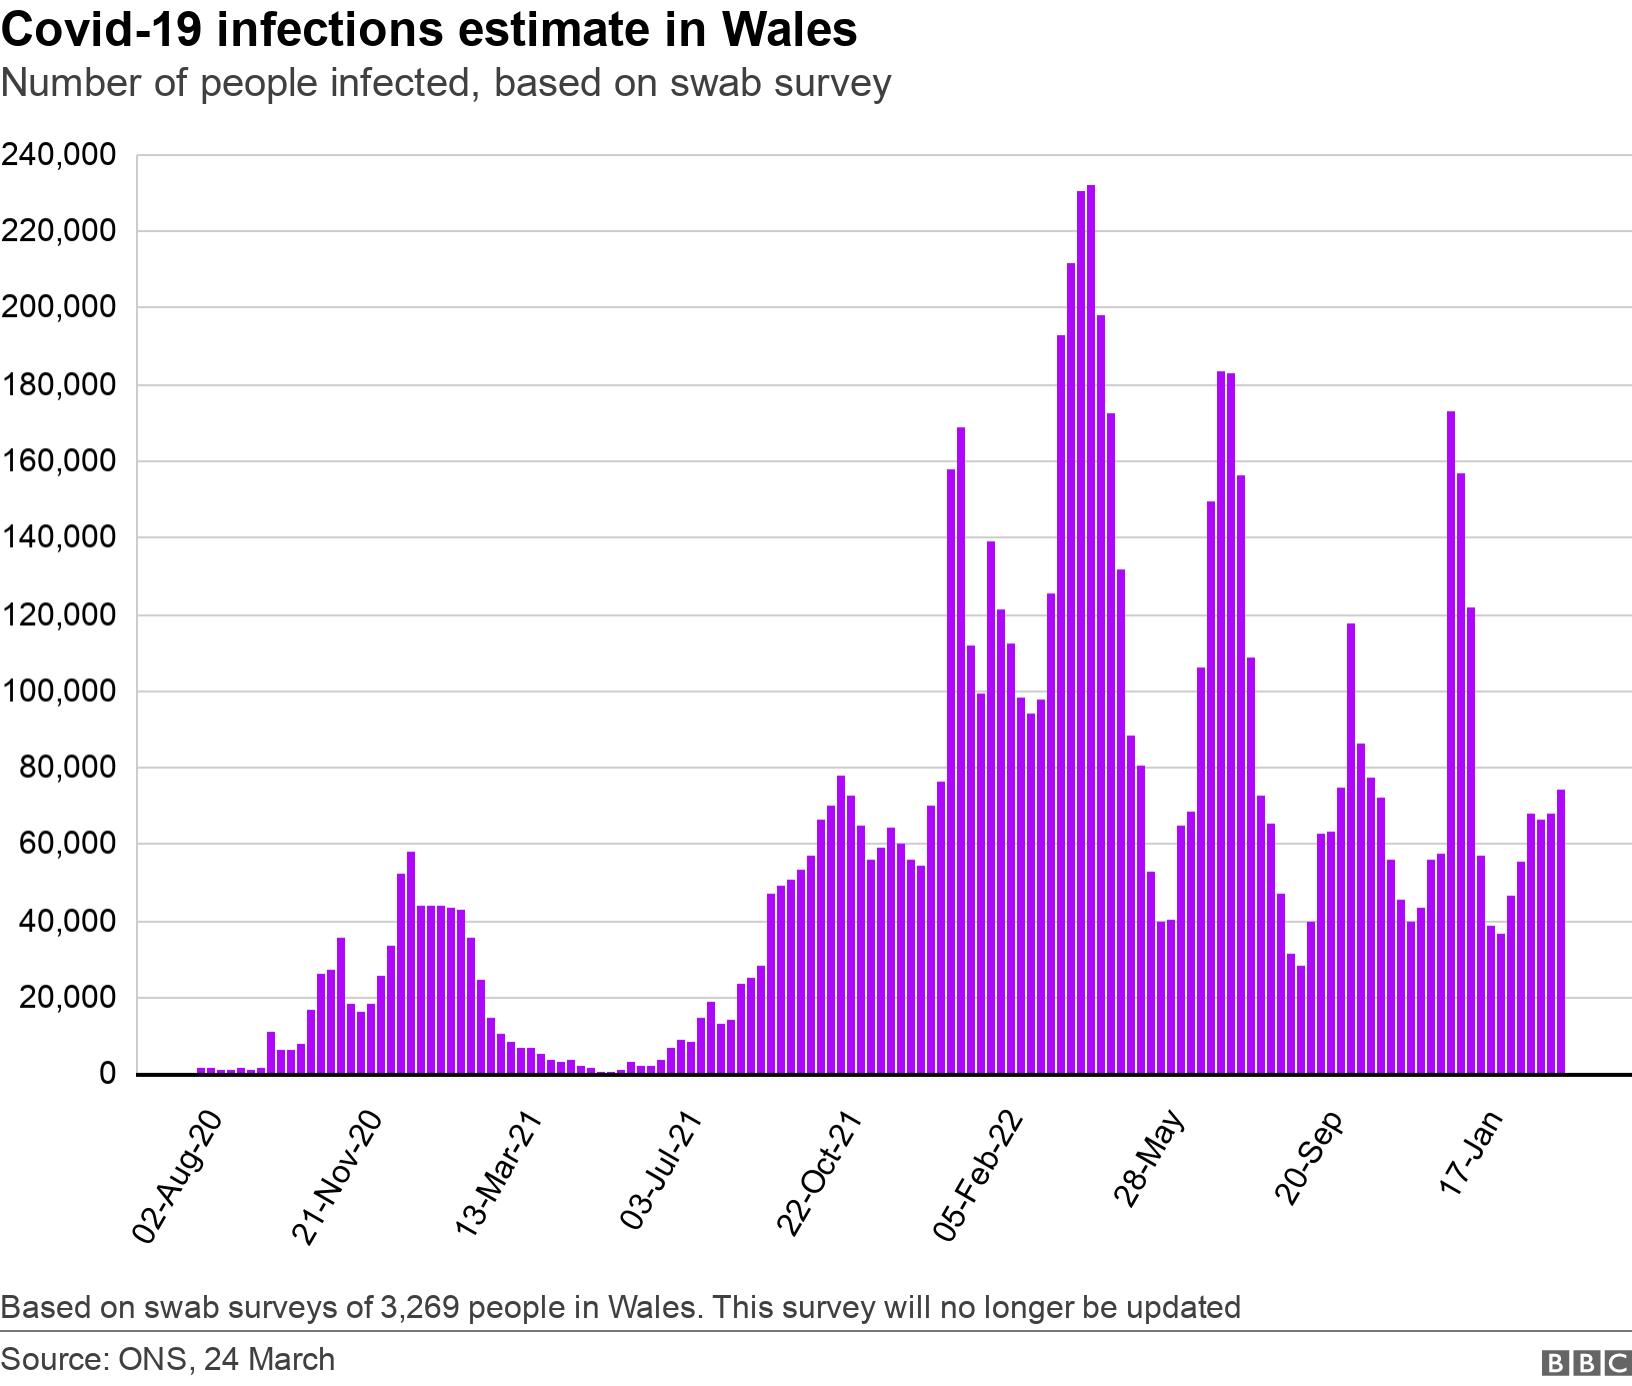 Covid-19 infections estimate in Wales. Number of people infected, based on swab survey.  Based on swab surveys of 3,269 people in Wales. This survey will no longer be updated.